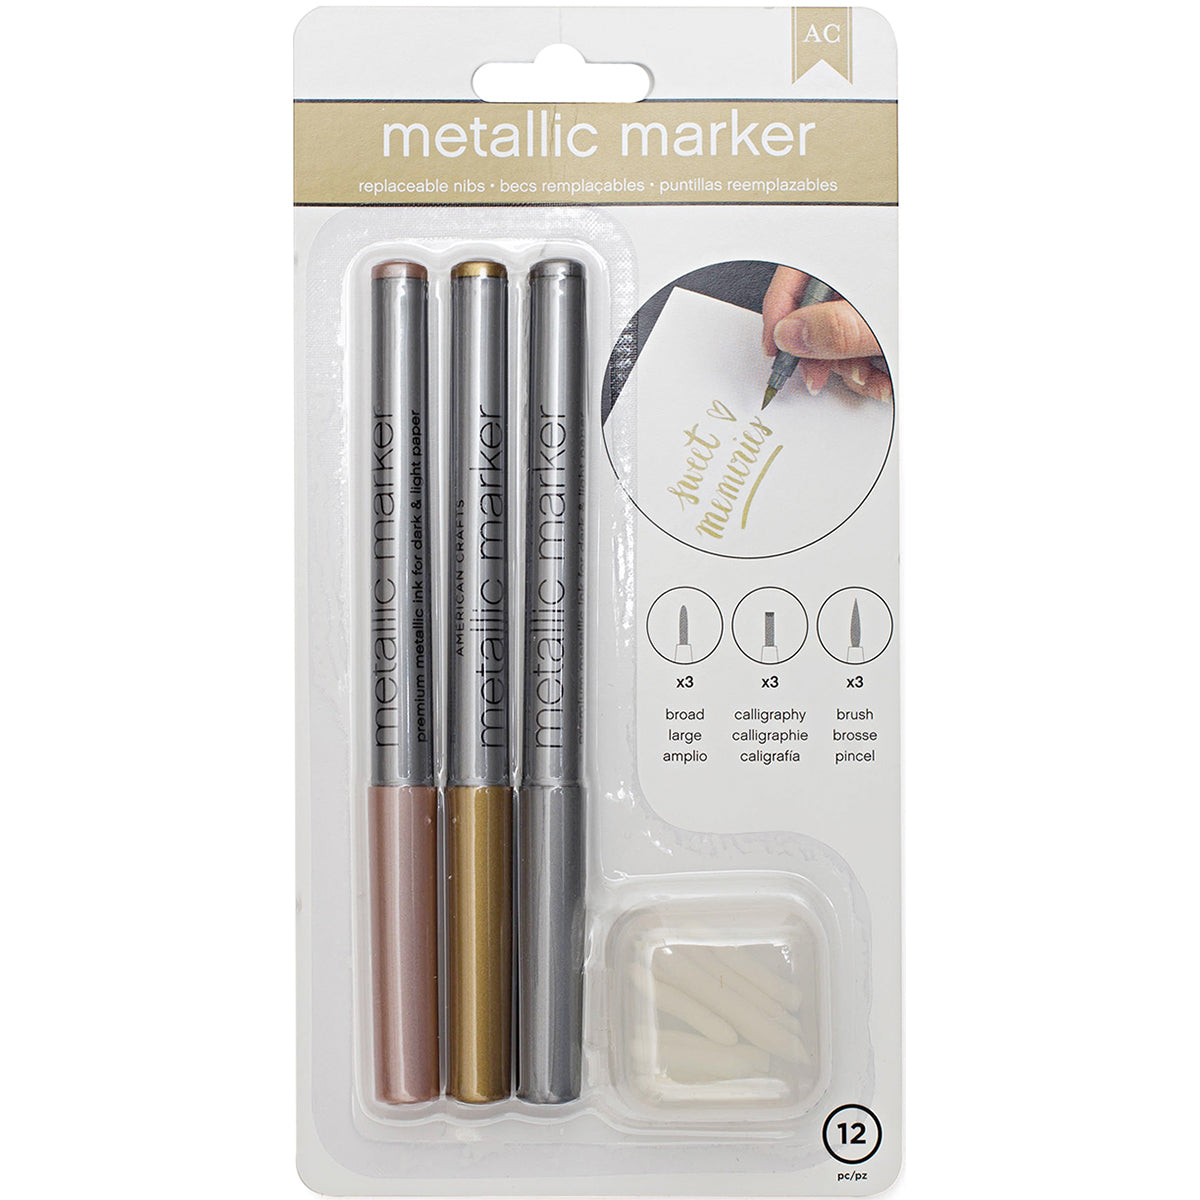 5 Crafter Square Metallic Marker 0.05 In Fine Tip.Silver, Rose, Gold, White